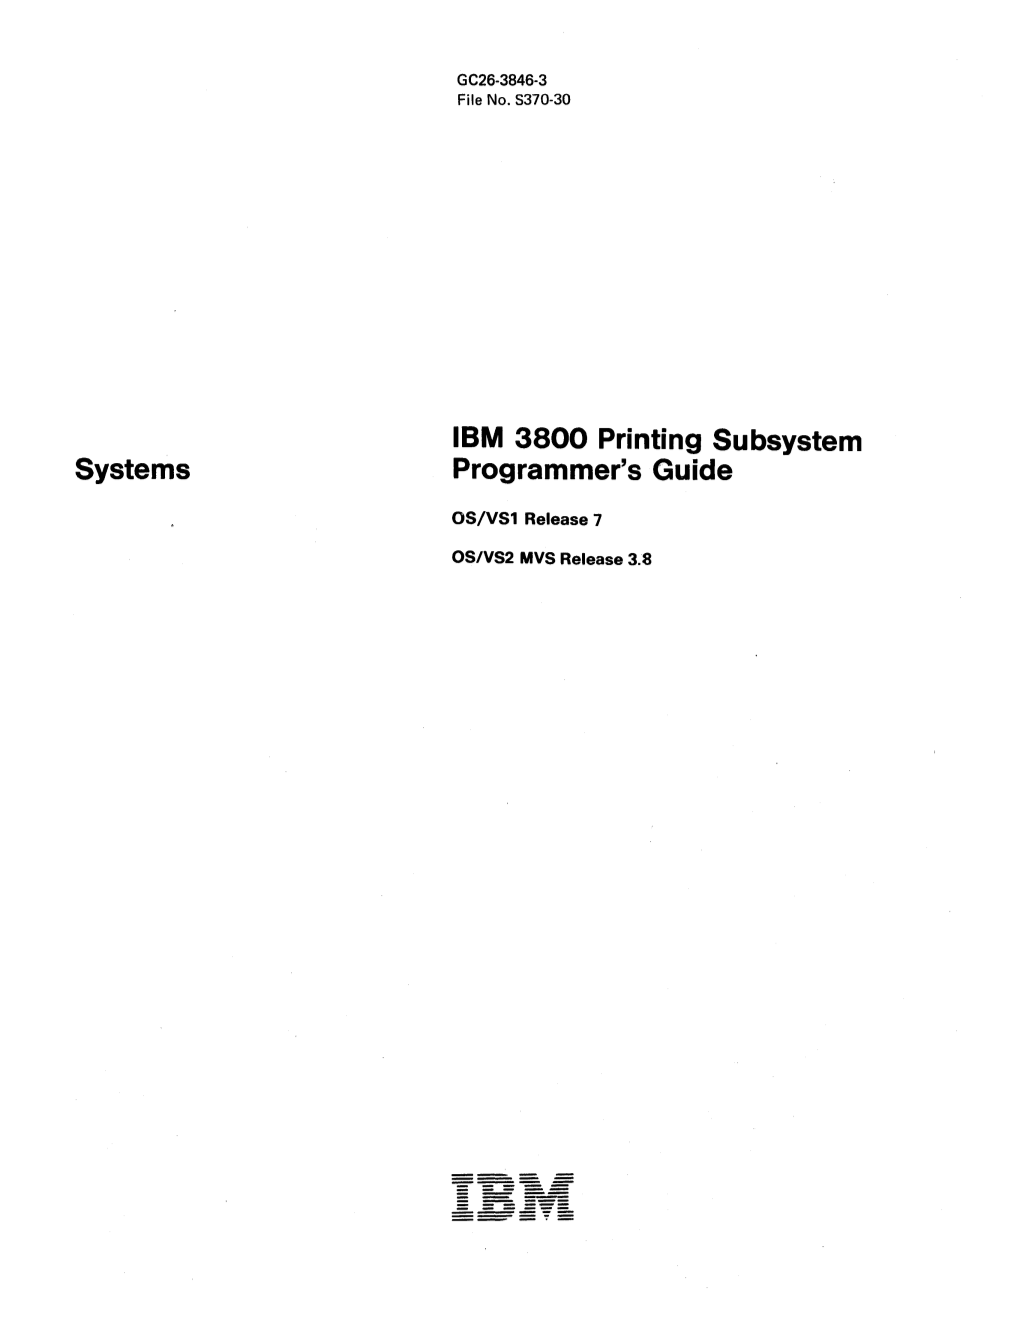 Systems IBM 3800 Printing Subsystem Programmer's Guide